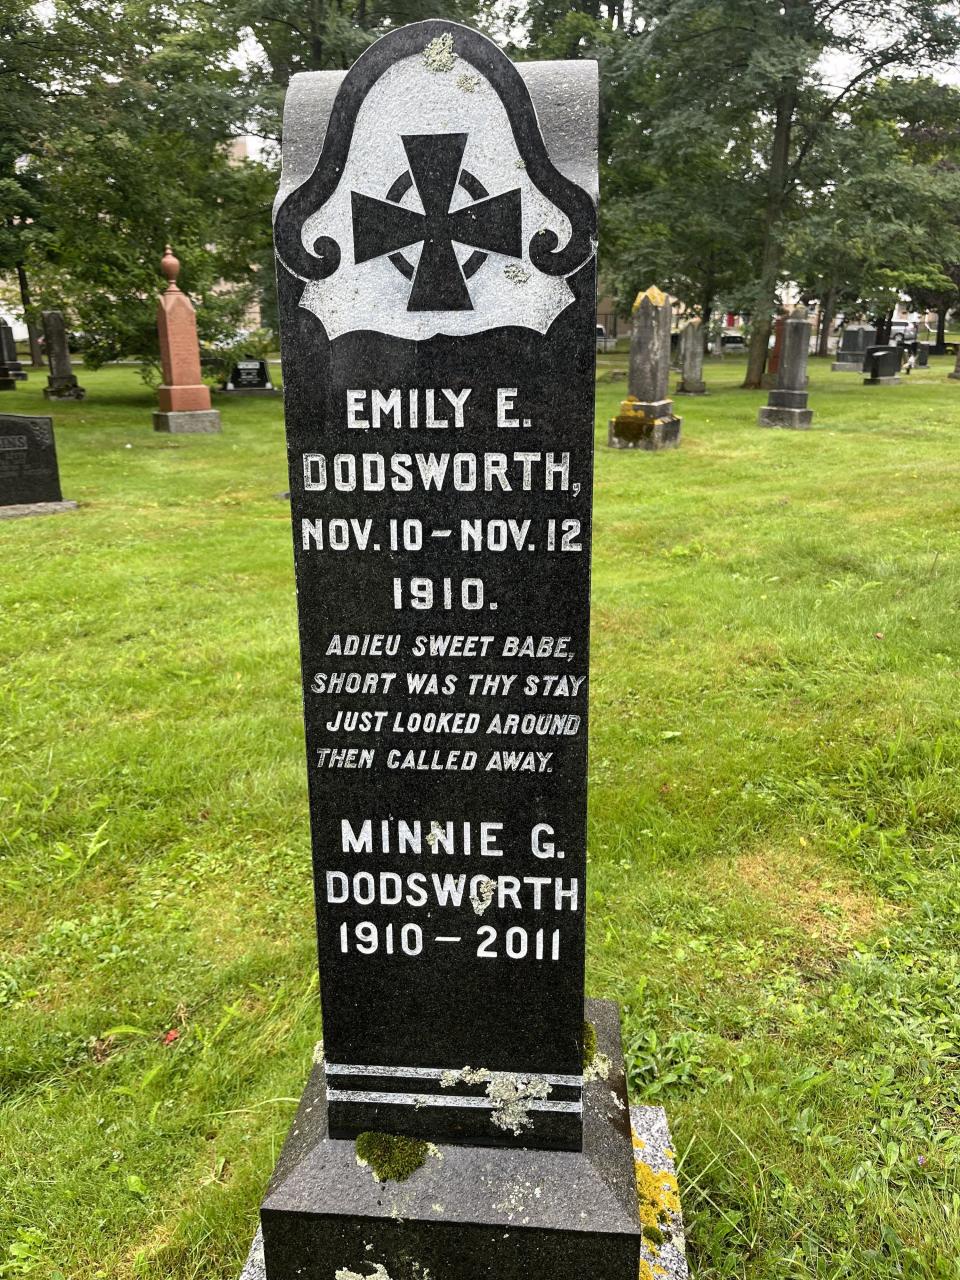 a tombstone that says Emily  Dodsworth nov 10-12, 1910 and Minnie Dodsworth 1910-2011